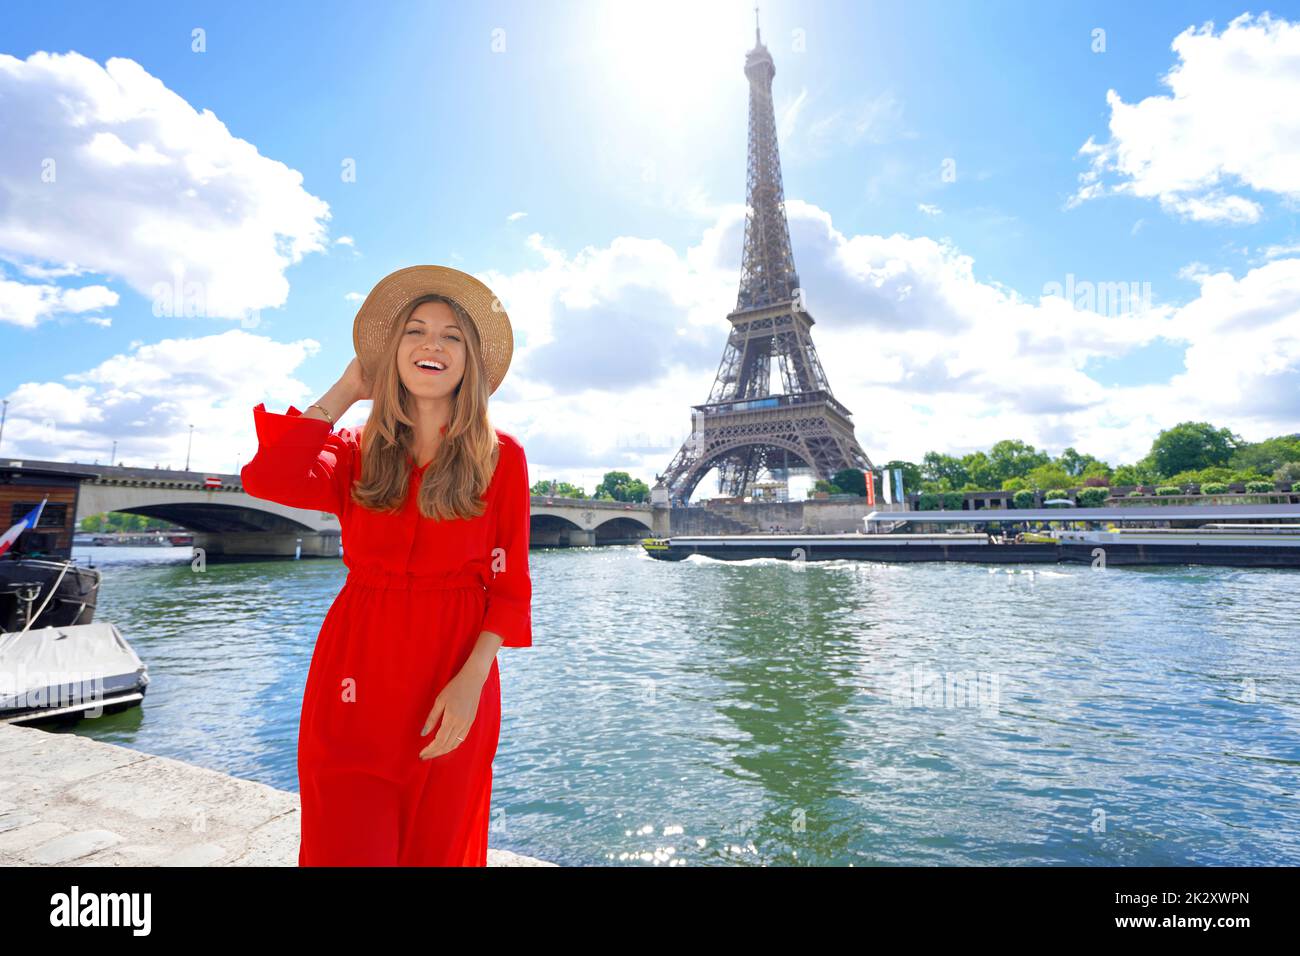 Romantic woman posing to the side of Eiffel Tower on Seine River in Paris, France Stock Photo